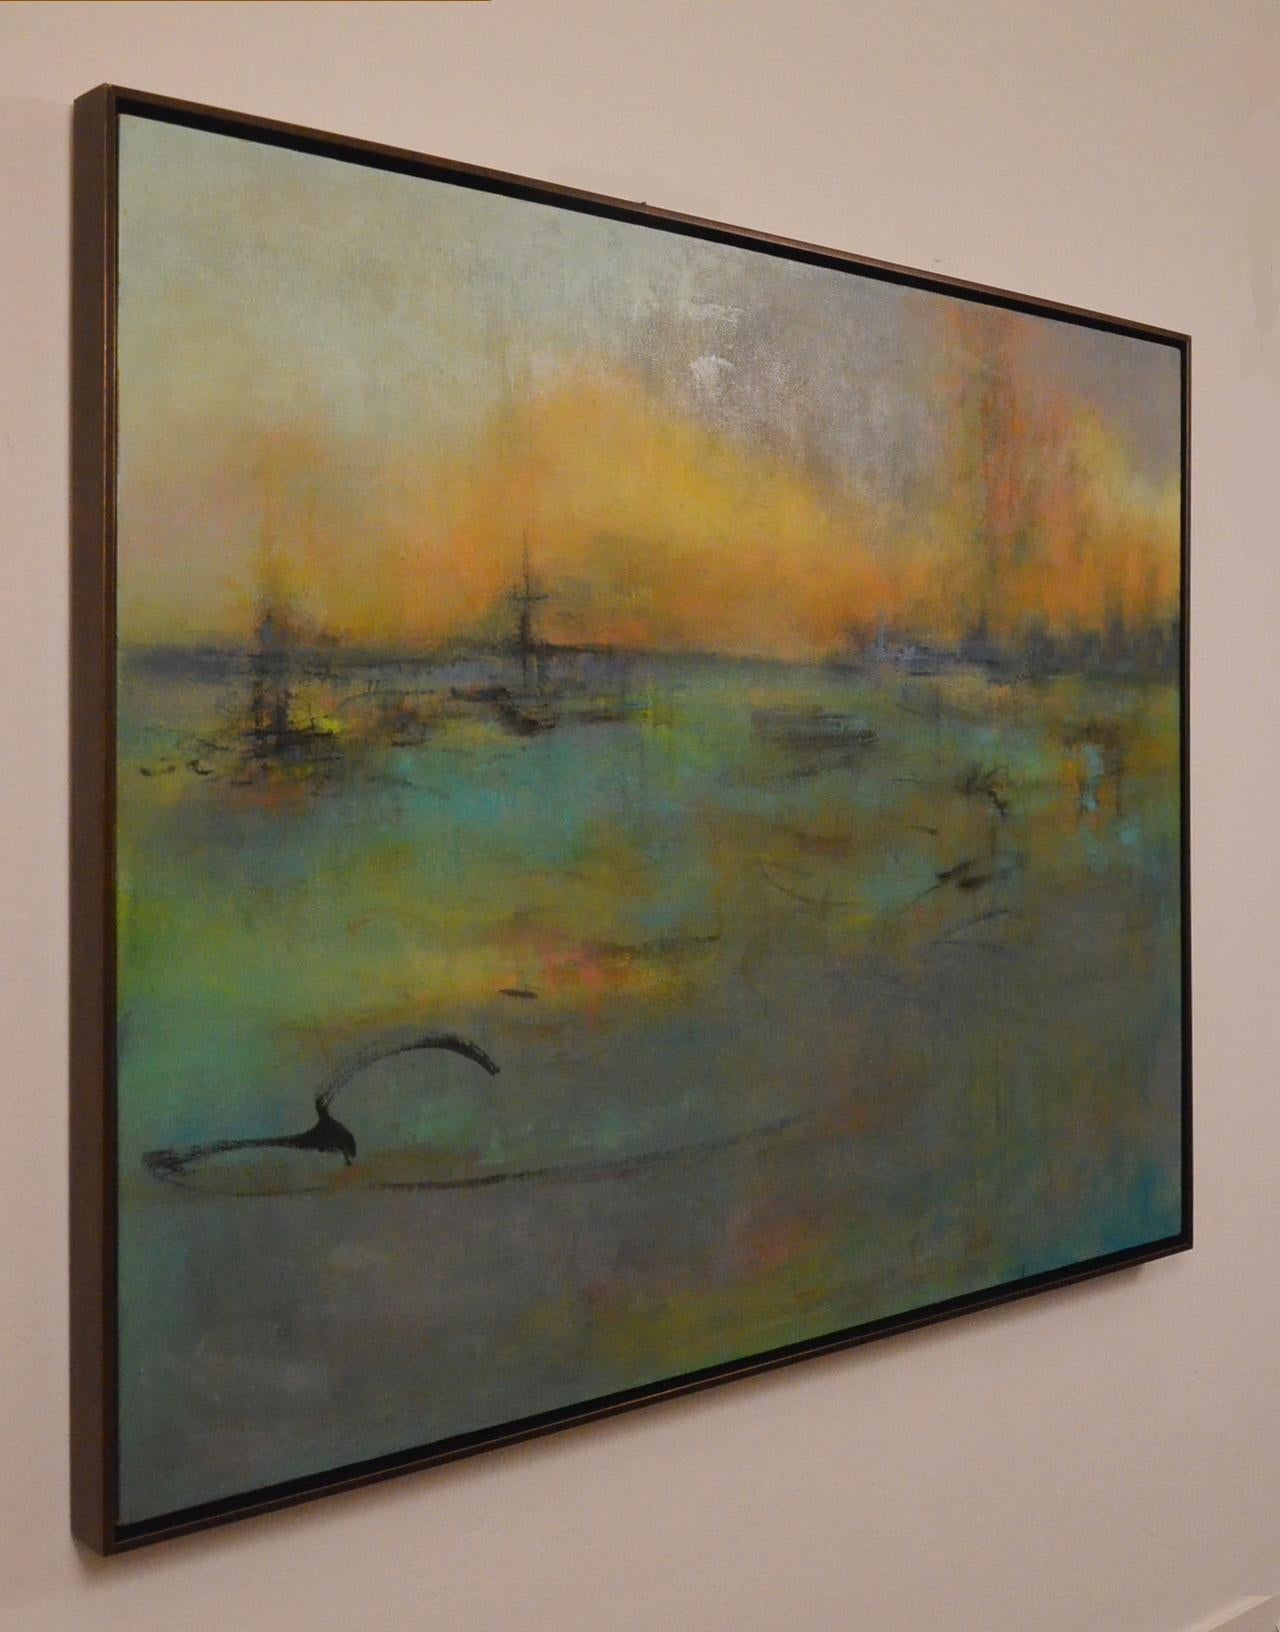  Martine Jardel’s paintings show a process of sedimentation. Thin layers of paint combined with a cold wax process let the light seep out from within the painting. The effect of color transparencies, light and dark, help create a mood or an